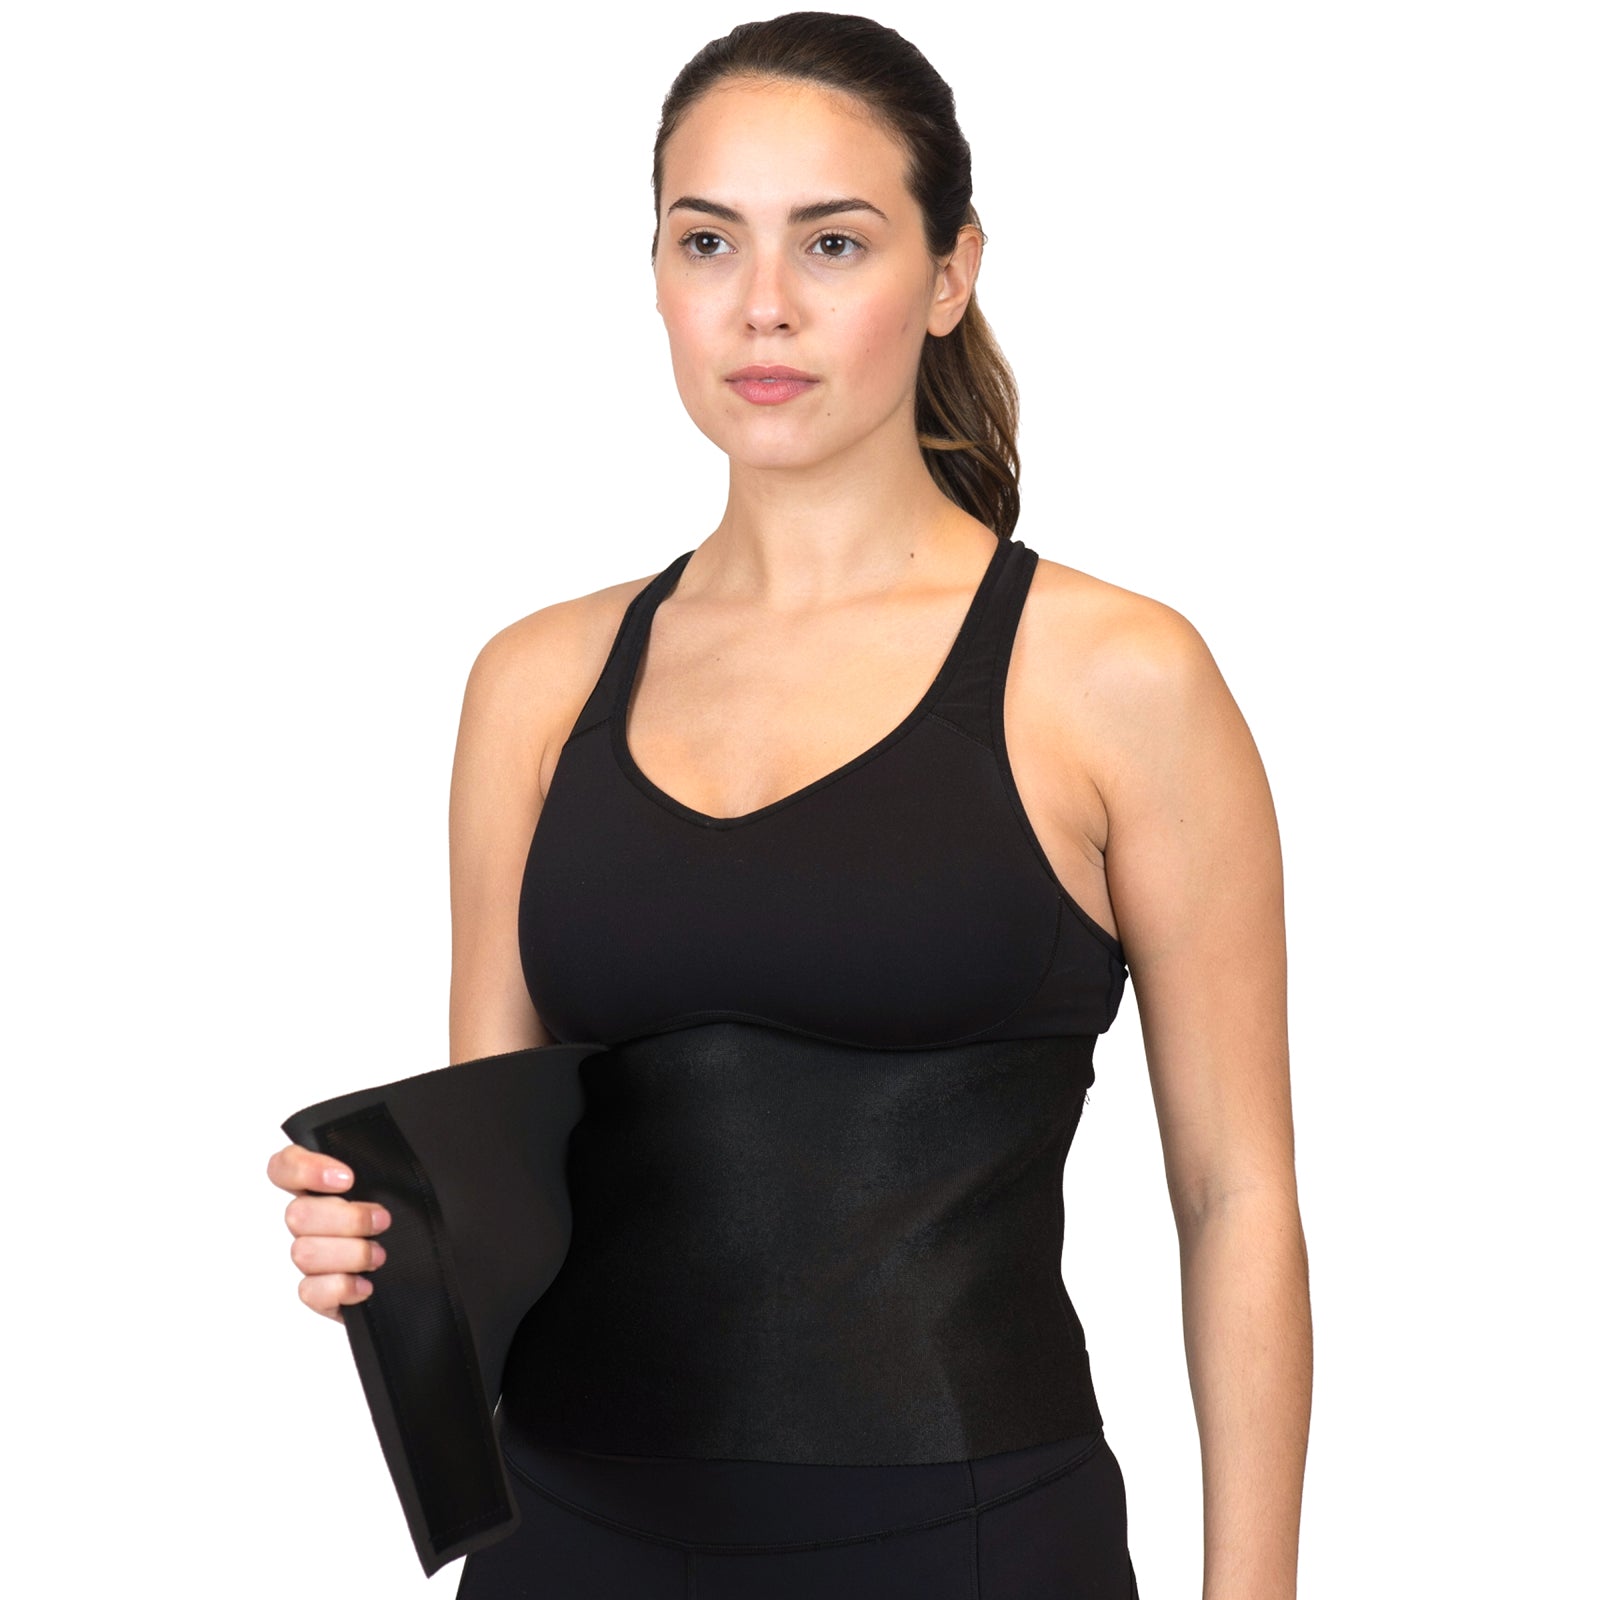 Viral Body Premium Waist Trimmer and Sweat Belt for Men and Women